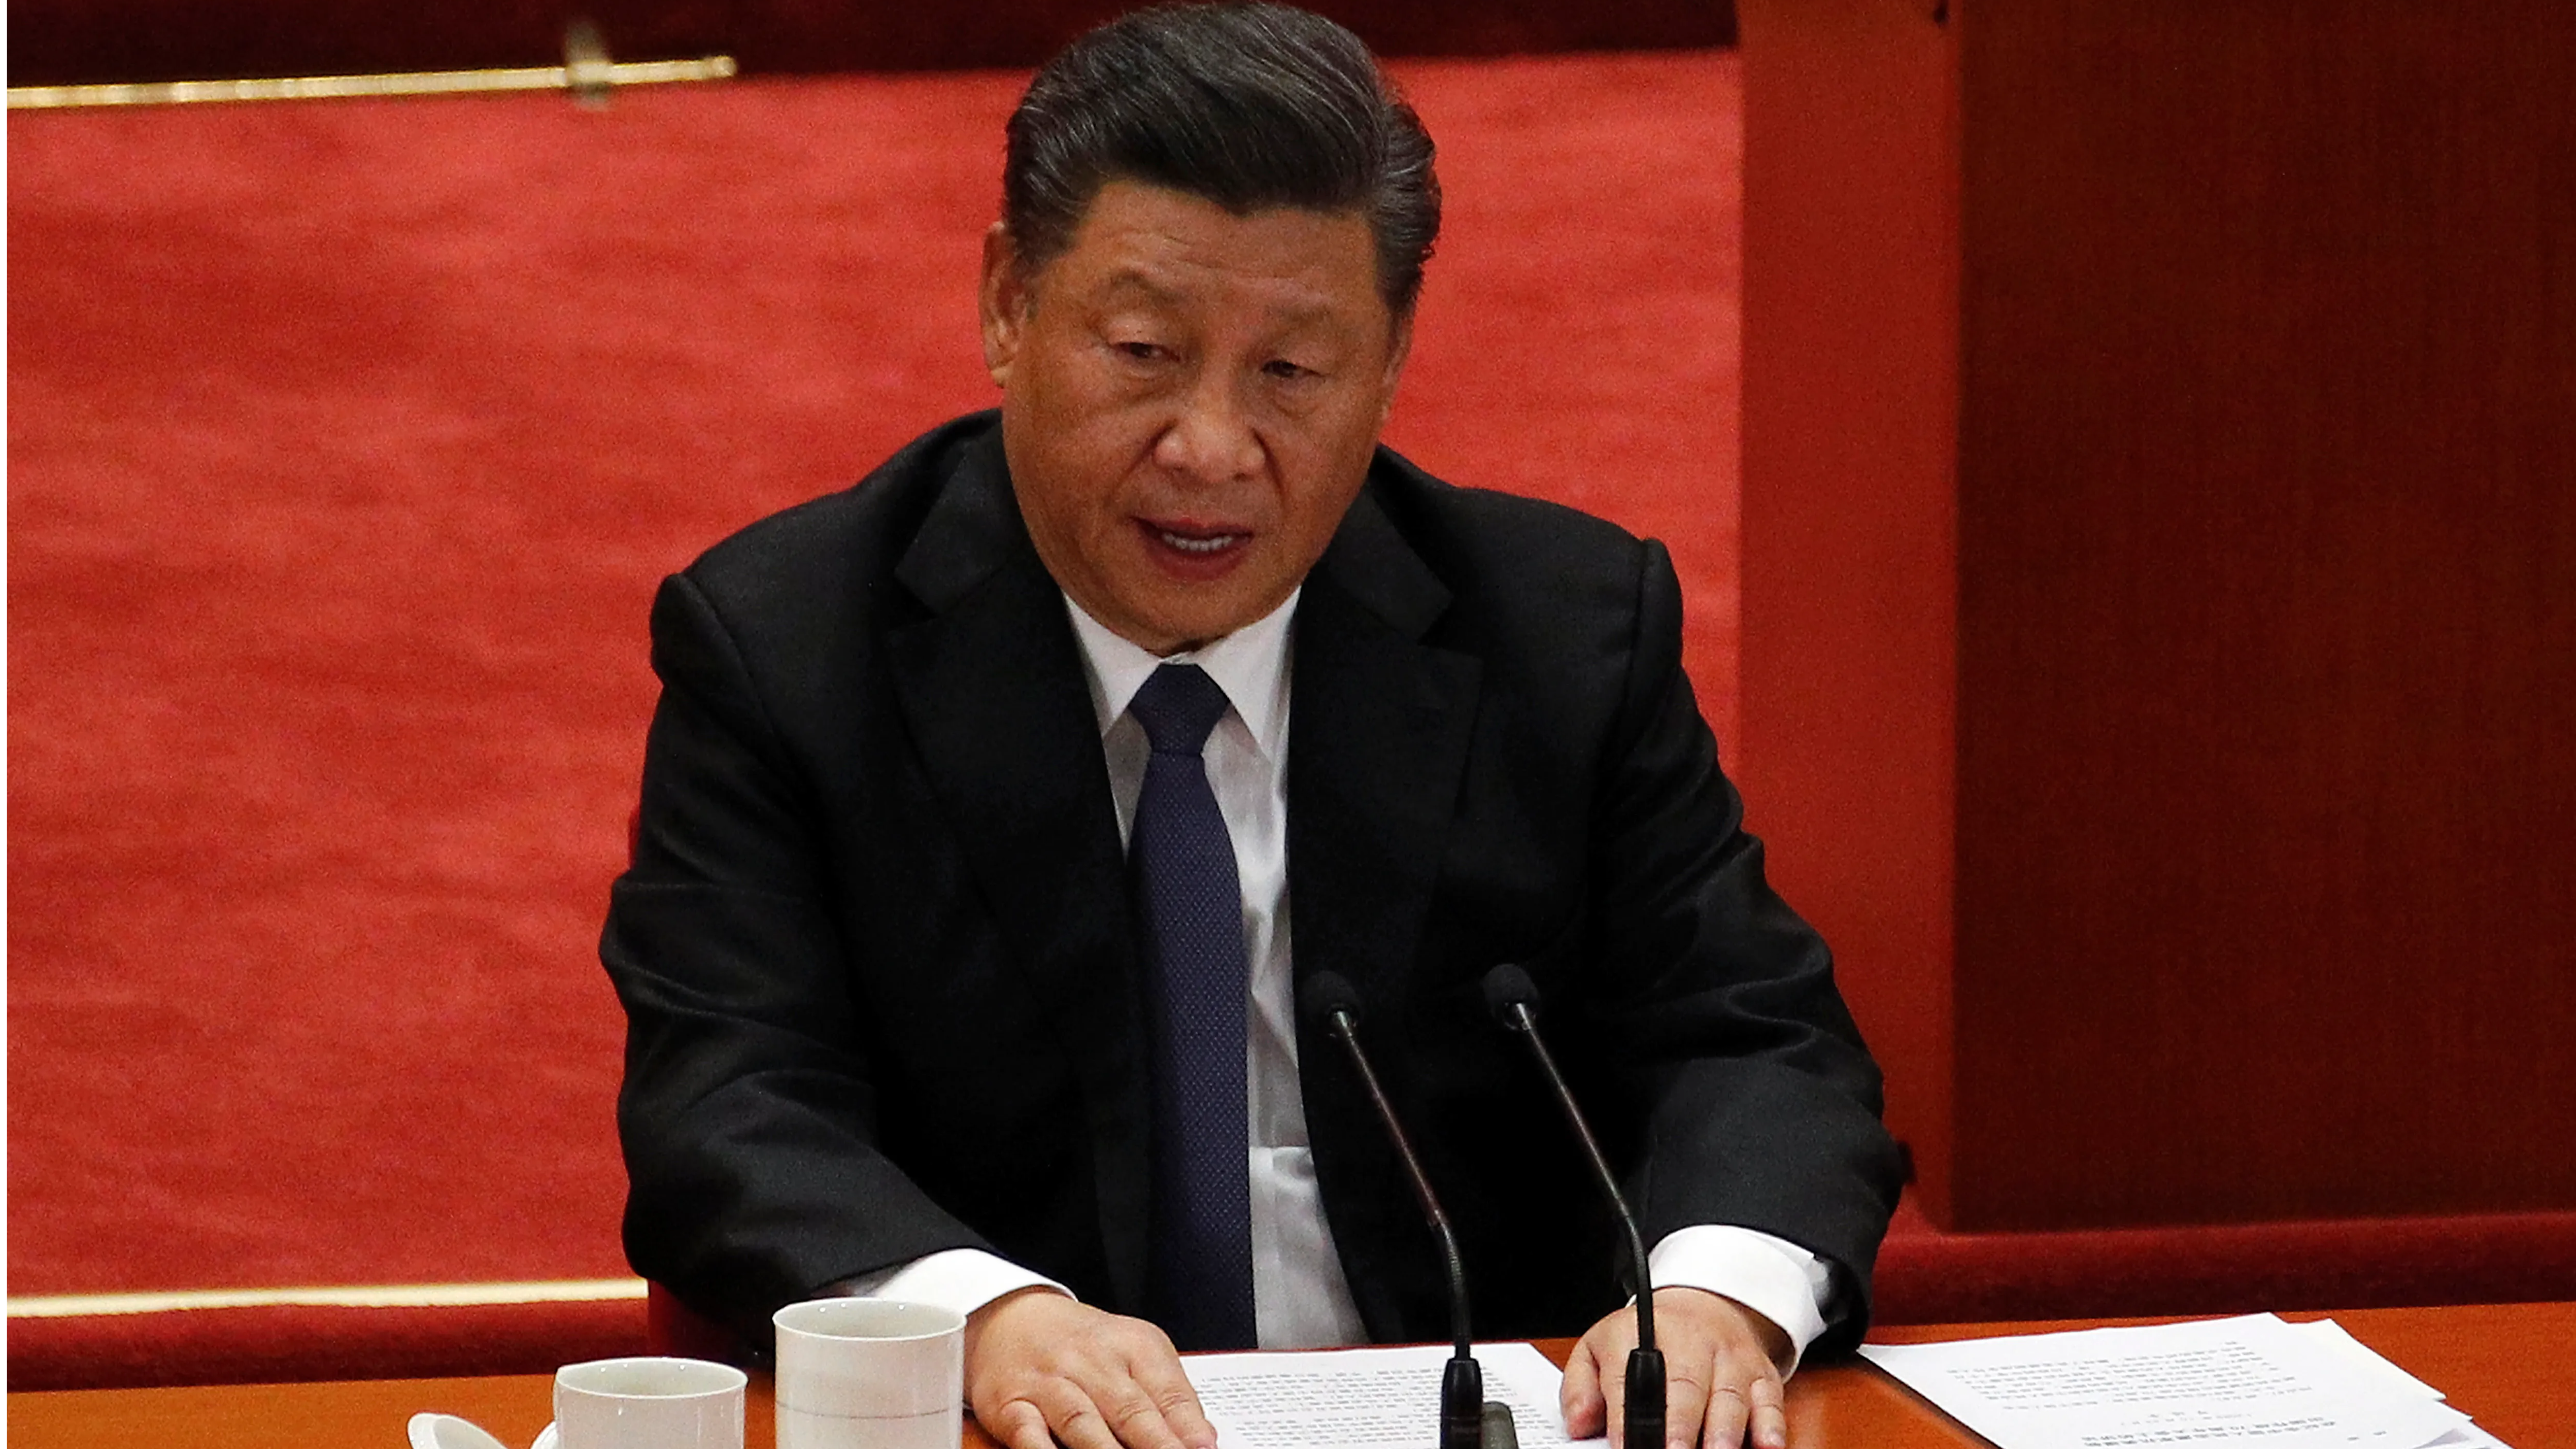 India, China will discuss Xi Jinping’s proposal to develop COVID-19 vaccine: Beijing